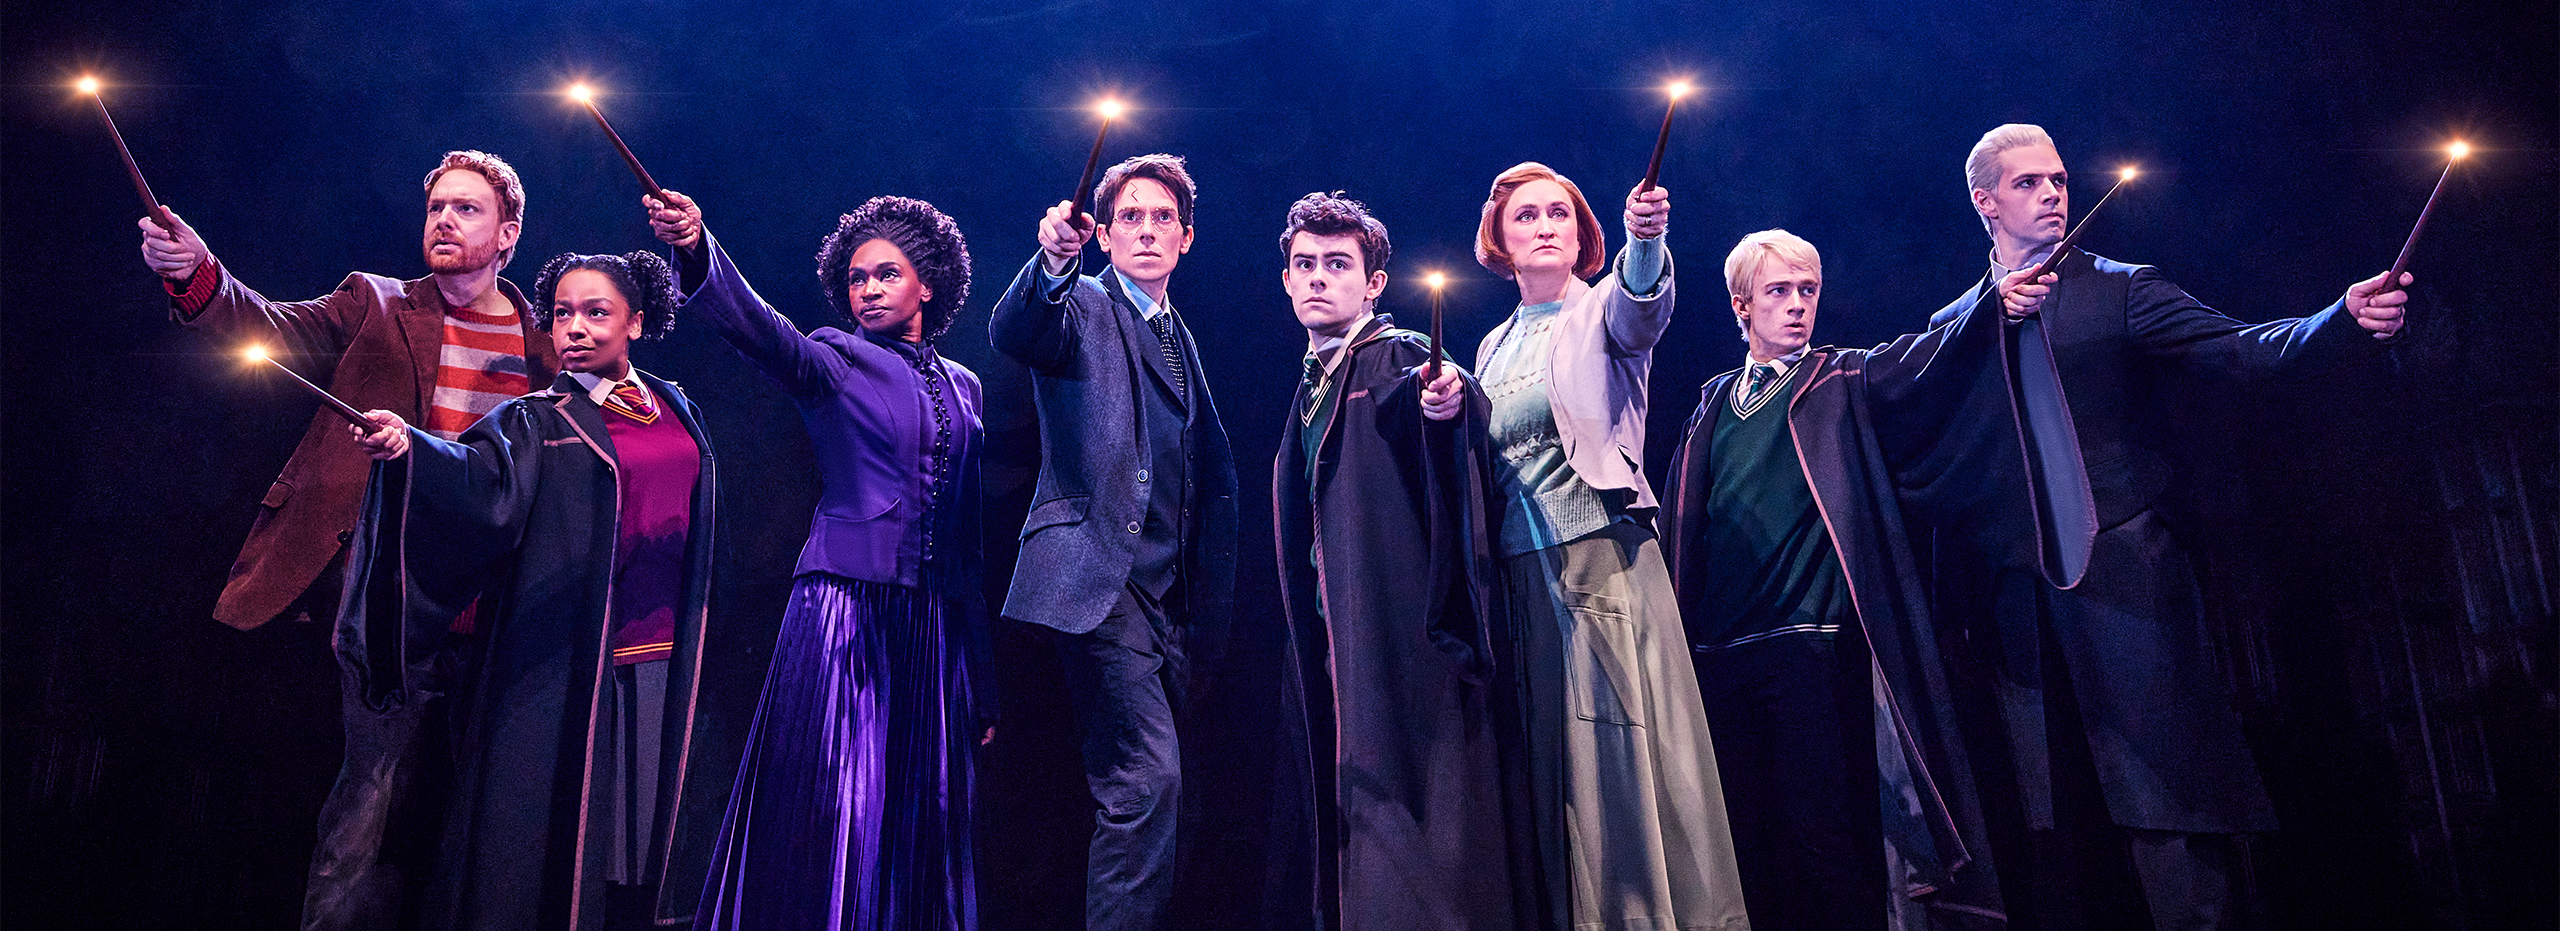 The cast of Harry Potter performing on Broadway